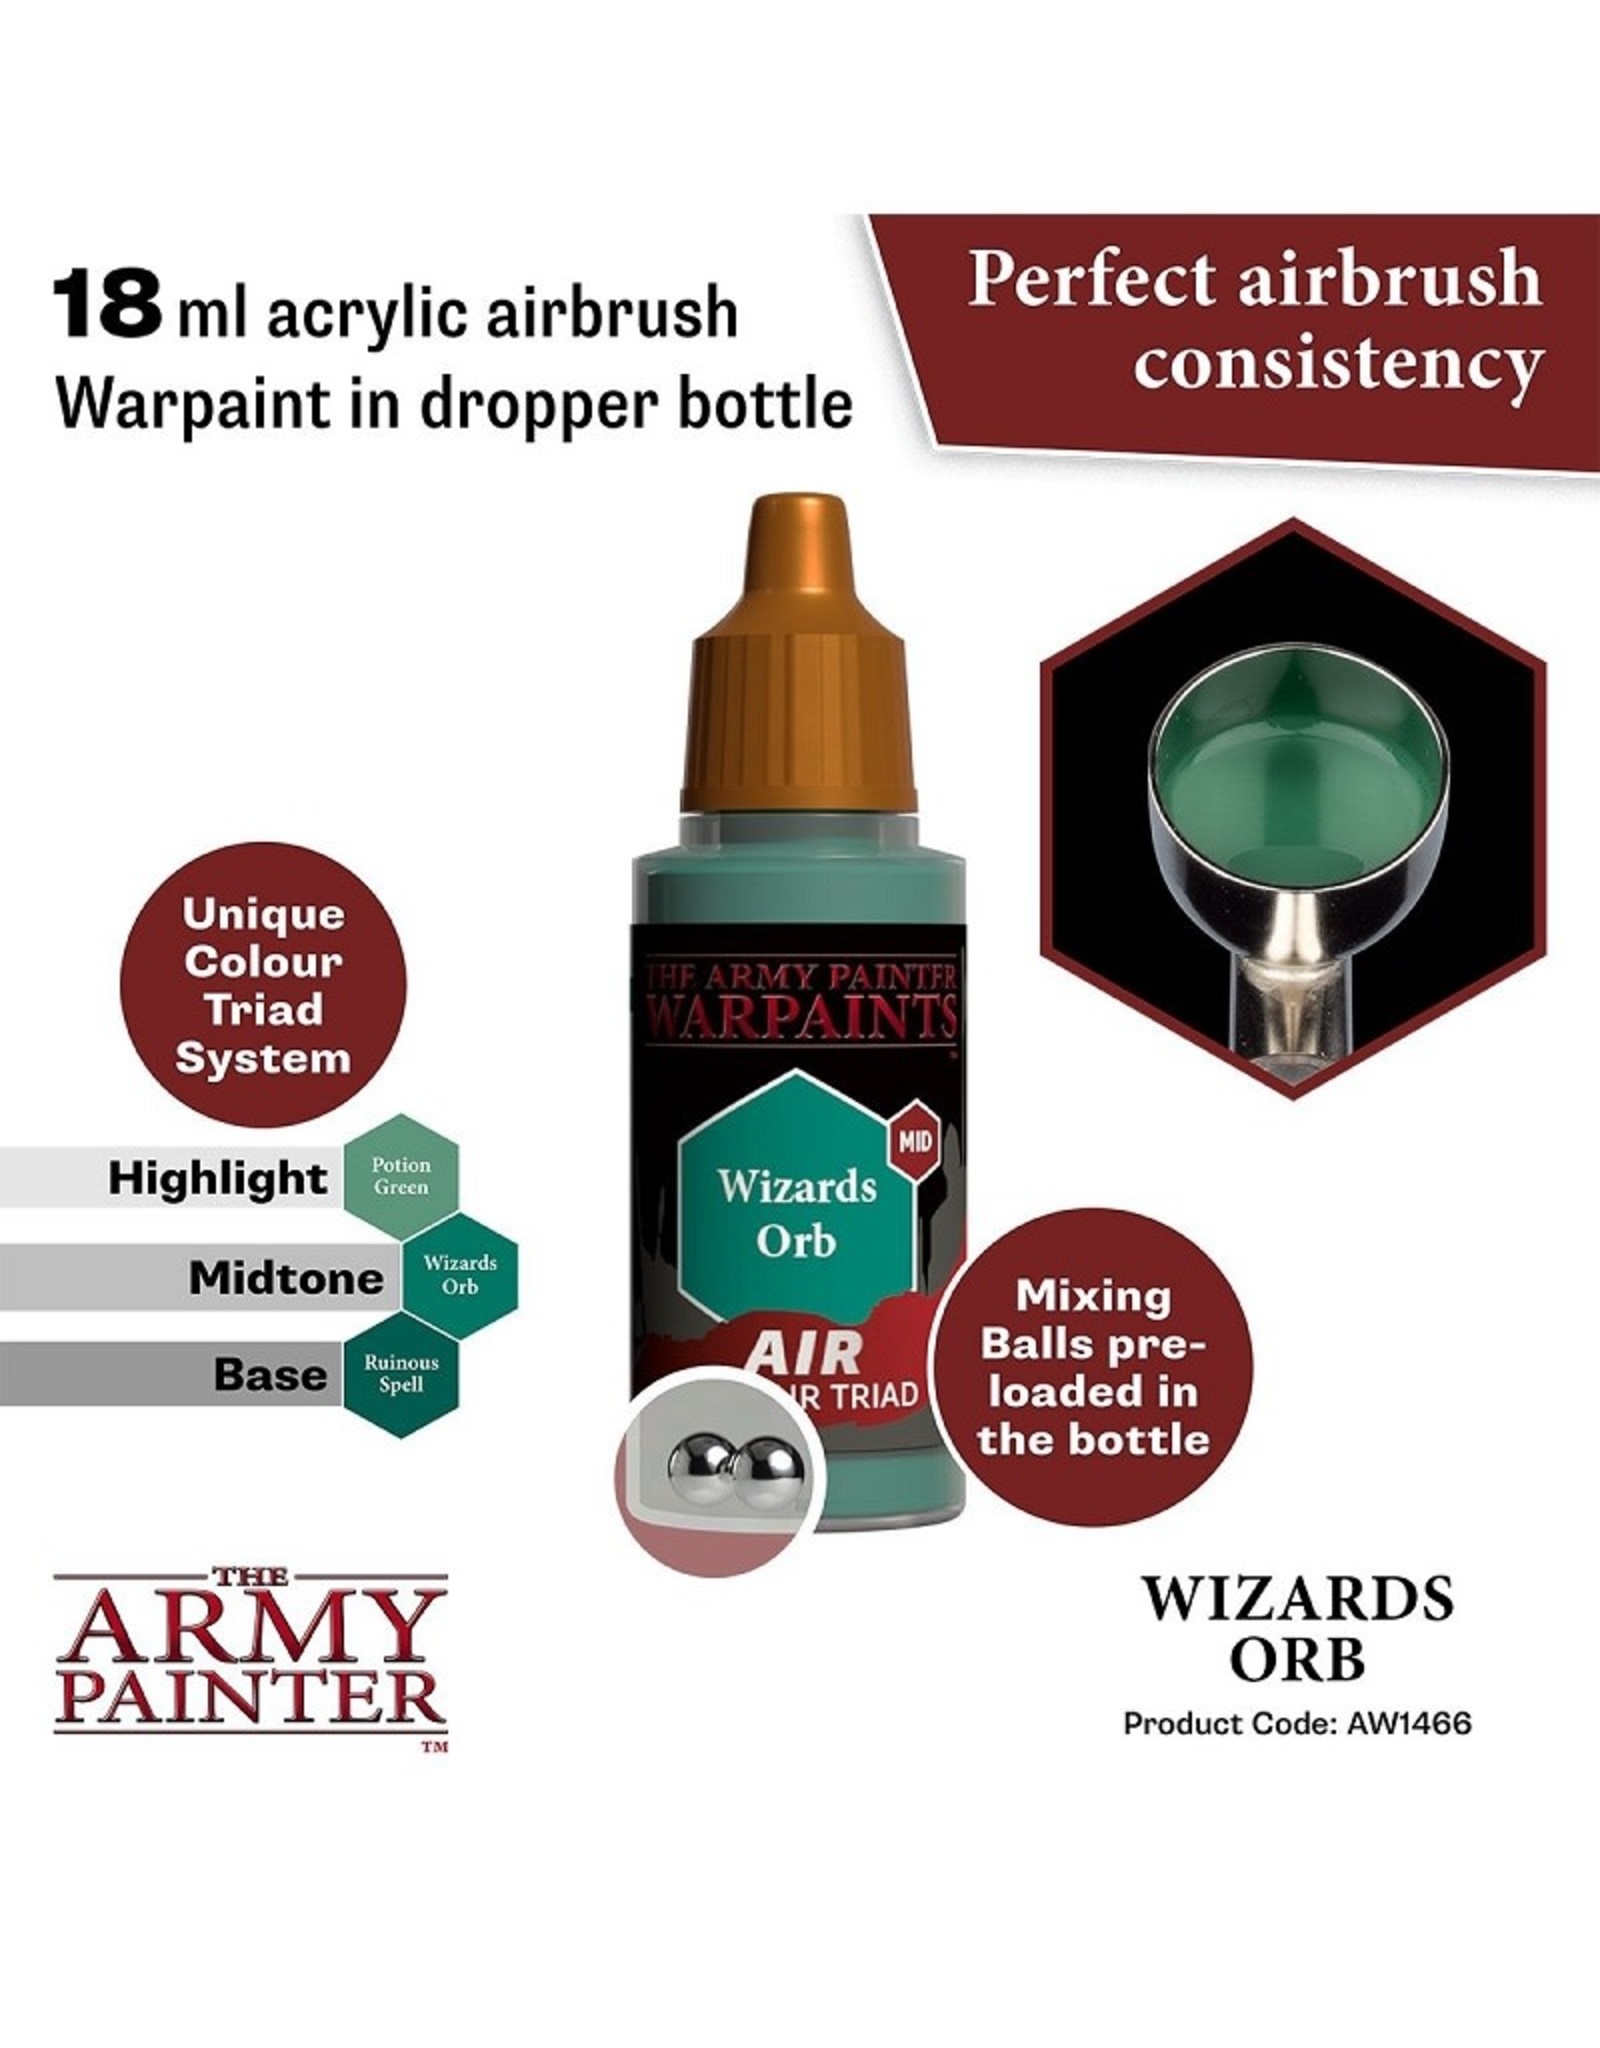 The Army Painter Warpaint Air: Wizards Orb (18ml)